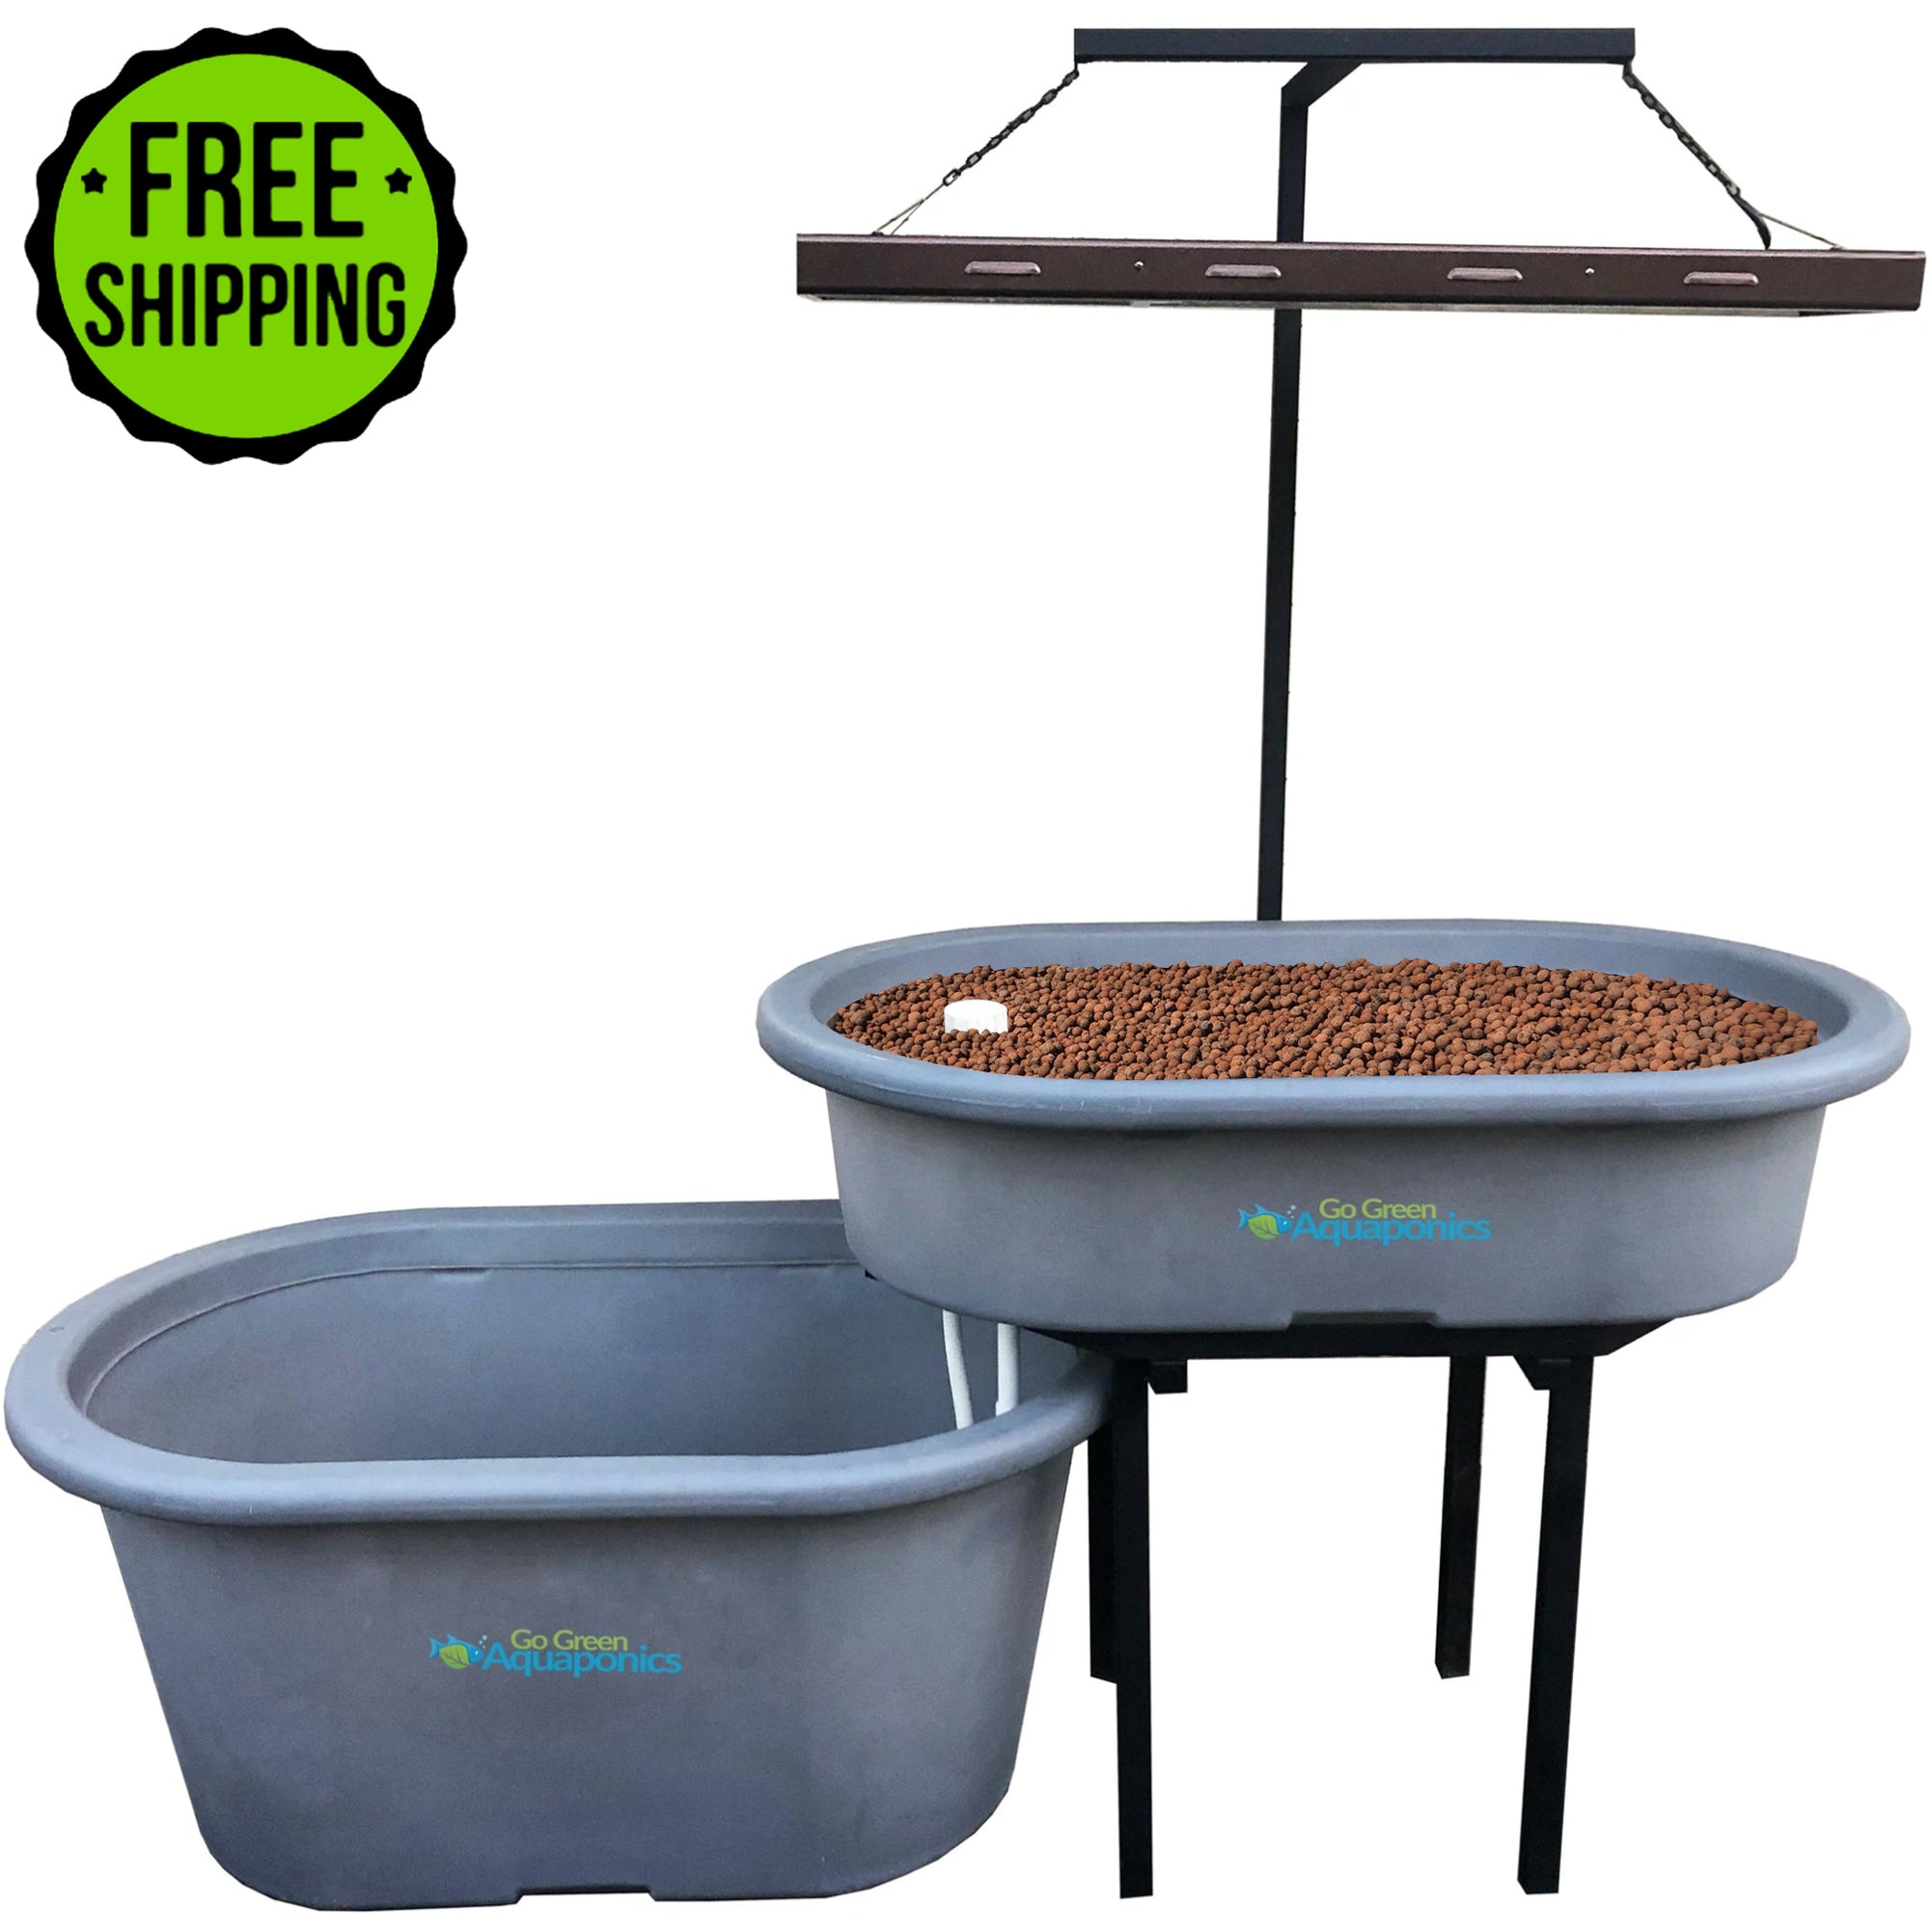 A Go Green Aquaponics System with a free shipping sign on it.